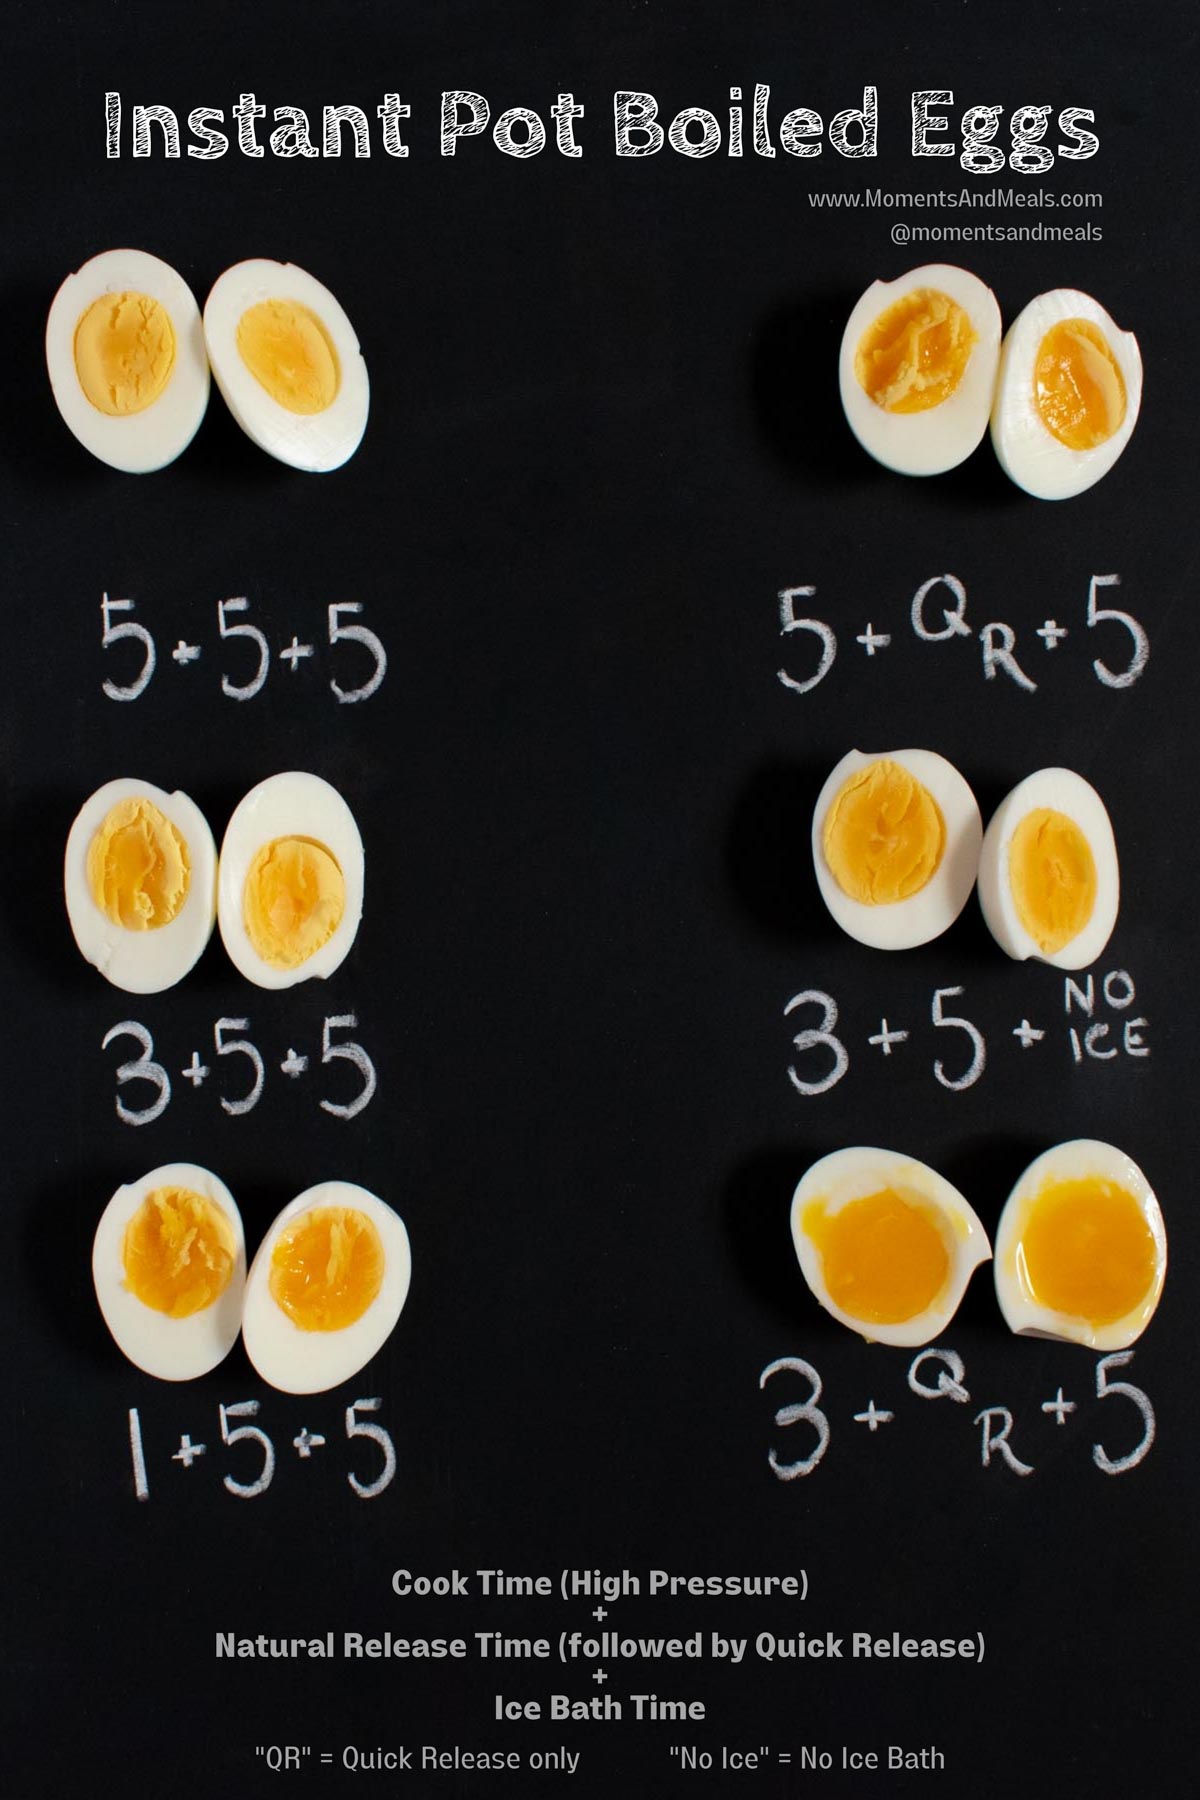 6 sets of boiled eggs, cut in half lengthwise to show doneness of yolk. Times listed for each set. Ranges from hard boiled on top left to soft boiled on bottom right. 